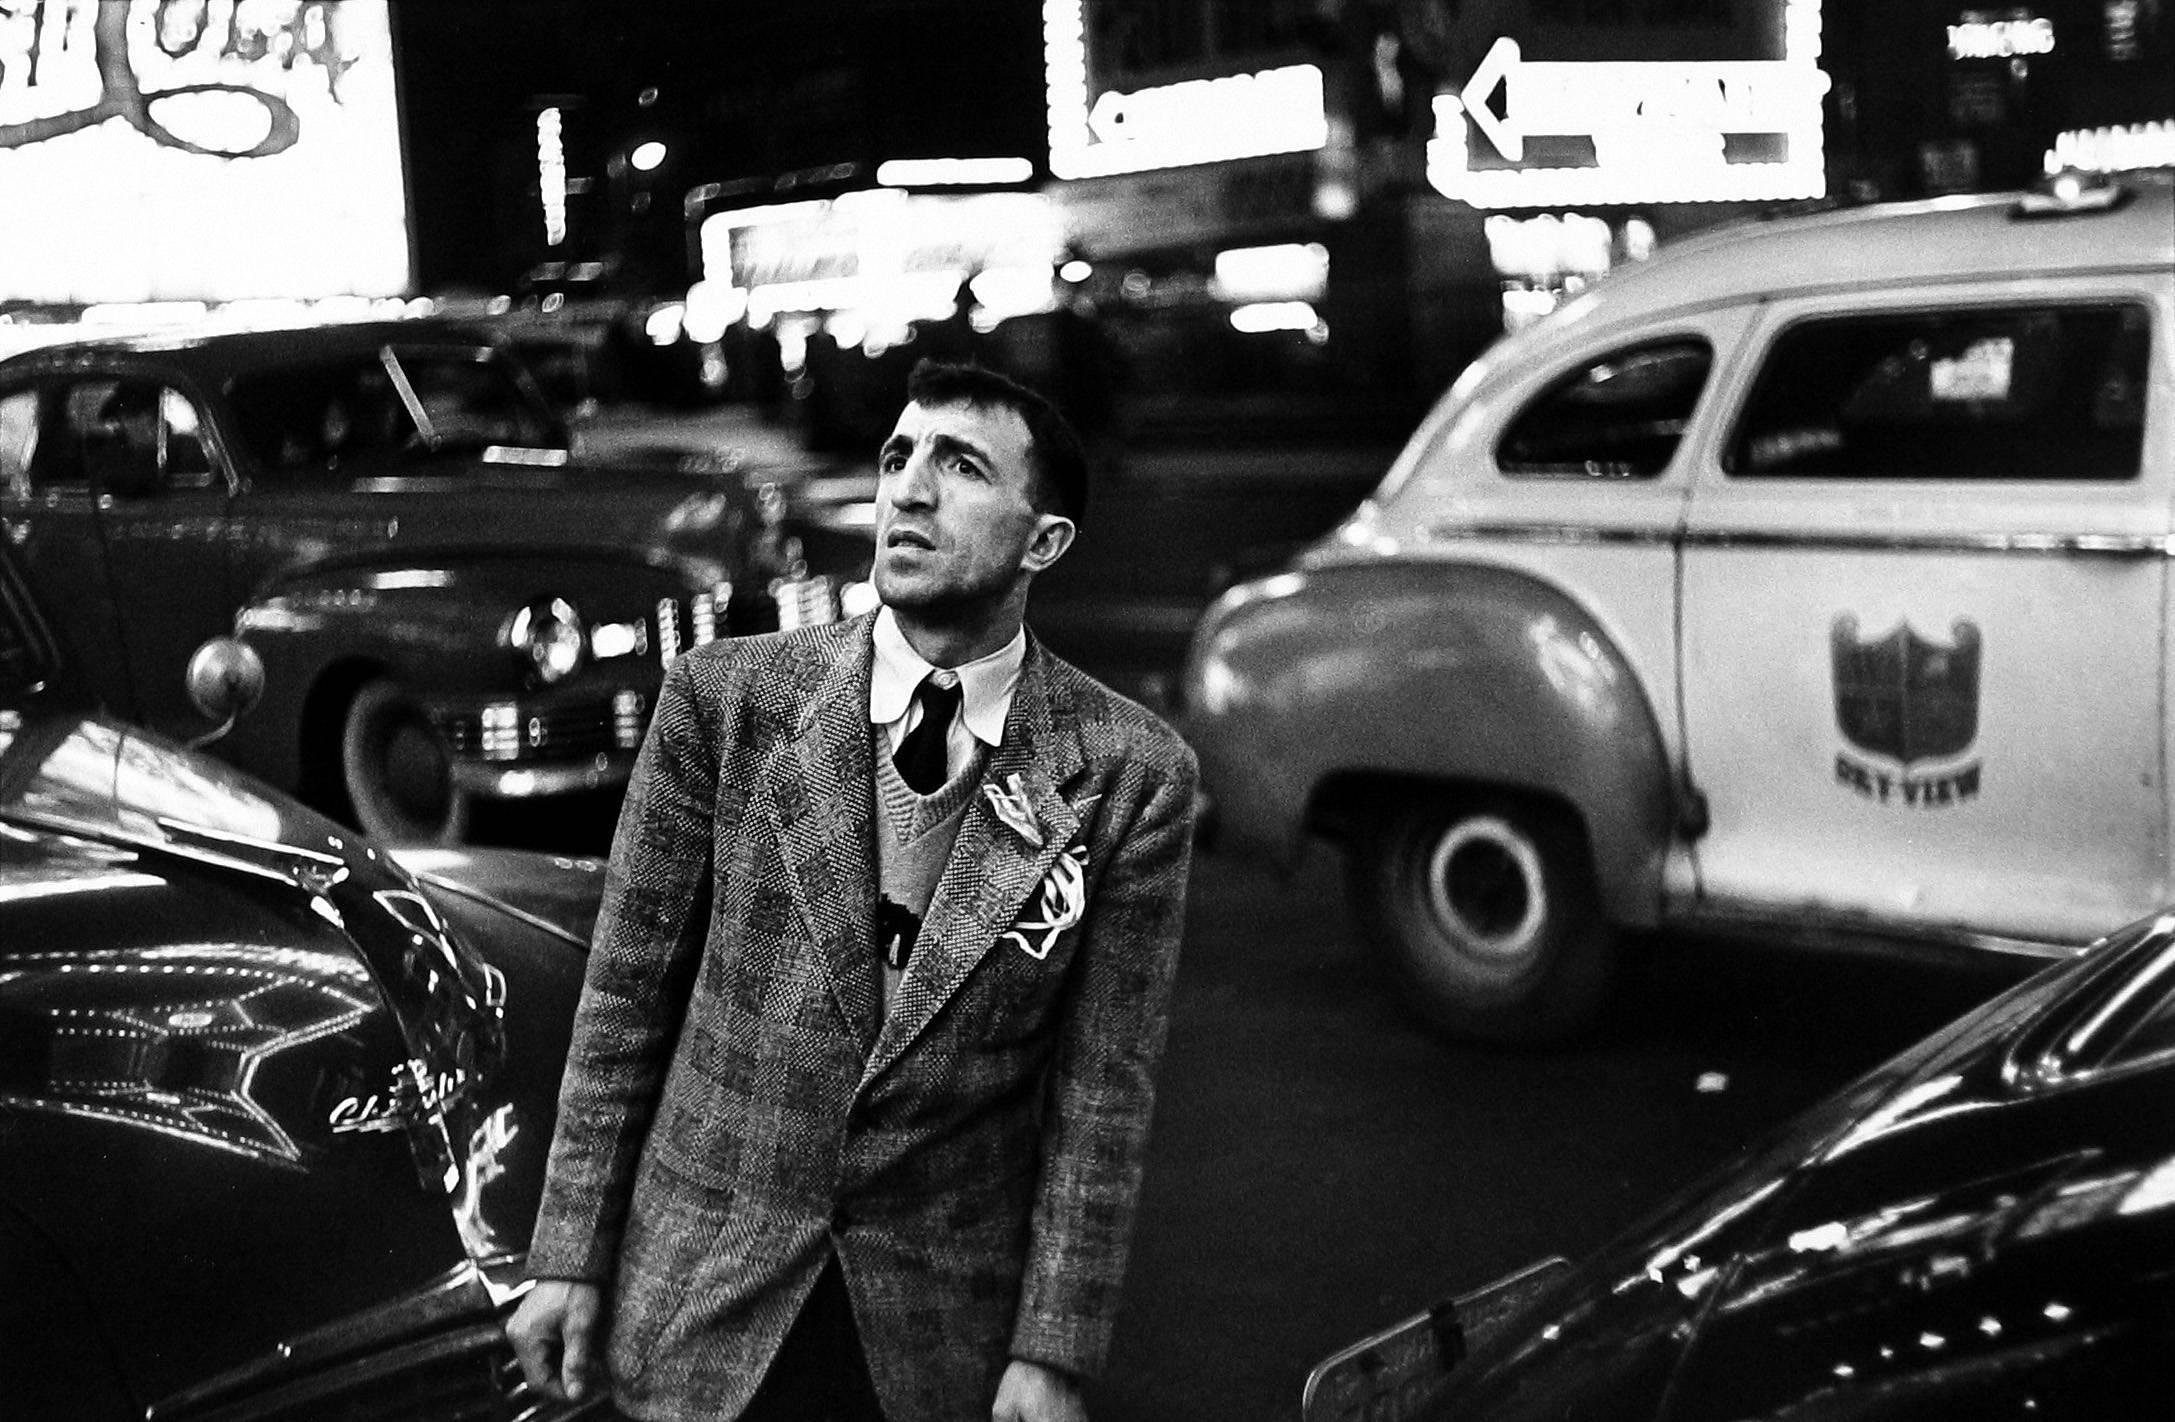 Louis Faurer Portrait Photograph - Champion (Man in Times Square Staring) New York City